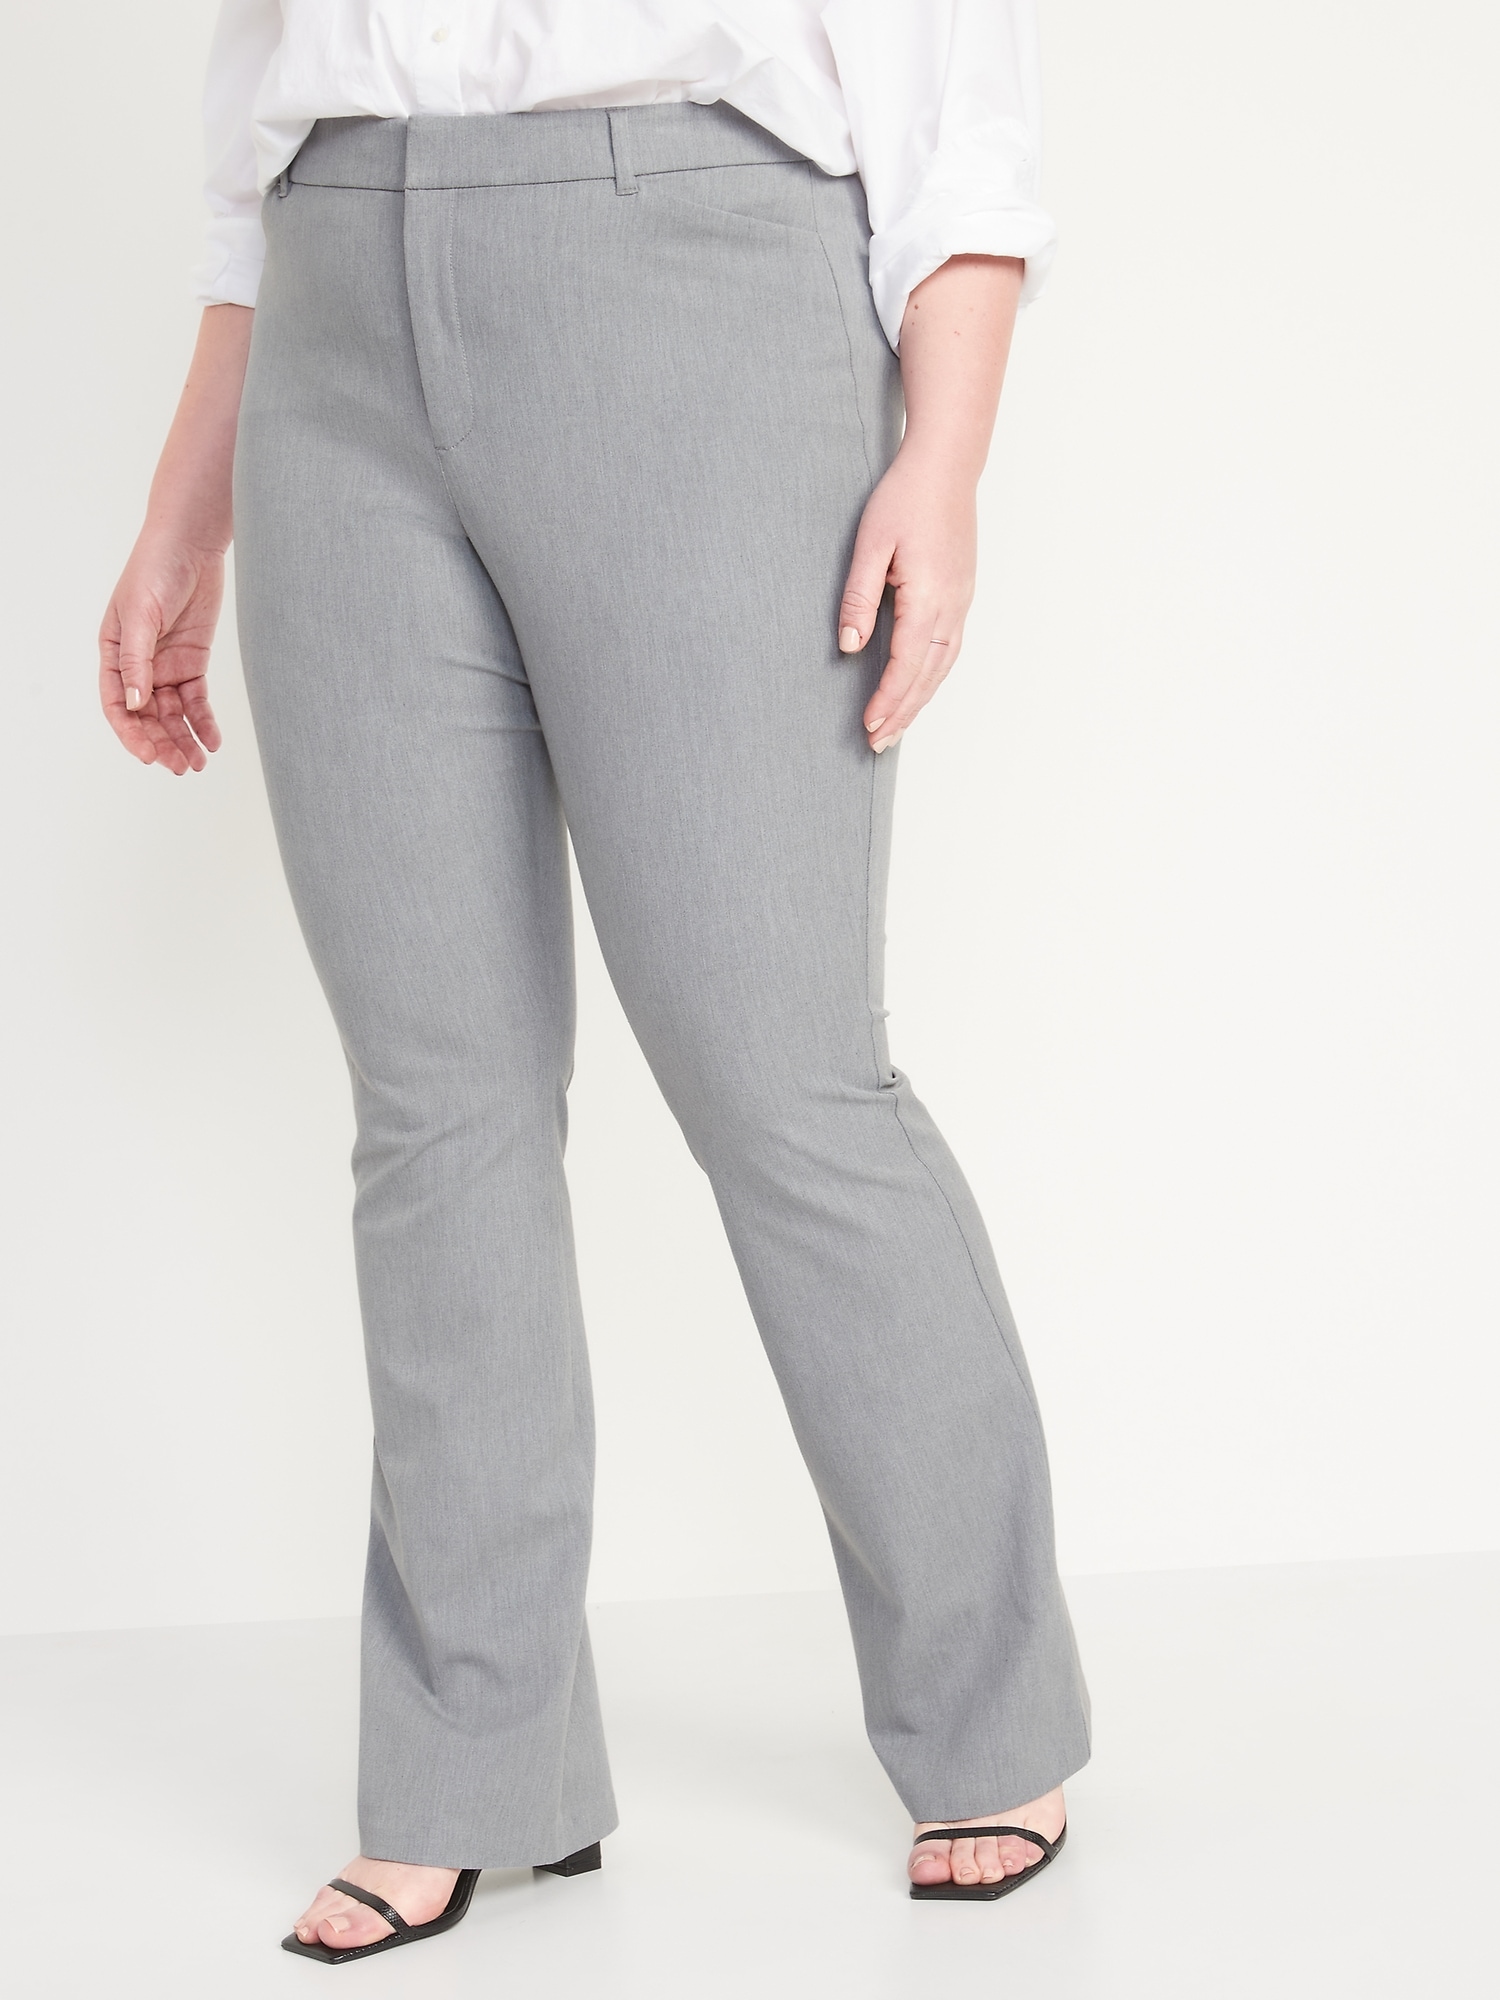 NWT Old Navy Pixie Flare High Waisted Pants Light Heather Gray 6P